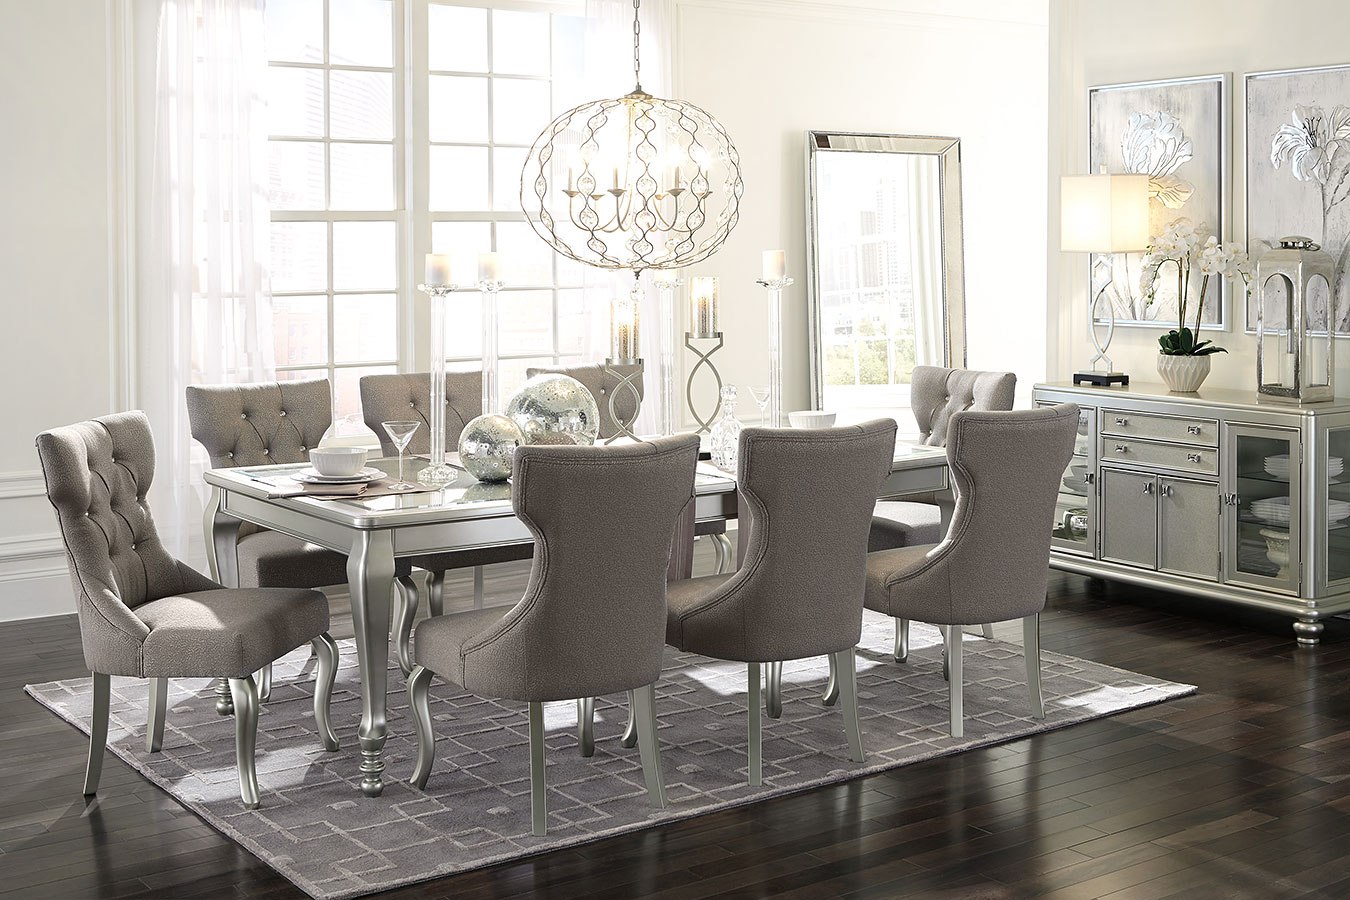 Dining Room Set With Ivory Color Chairs